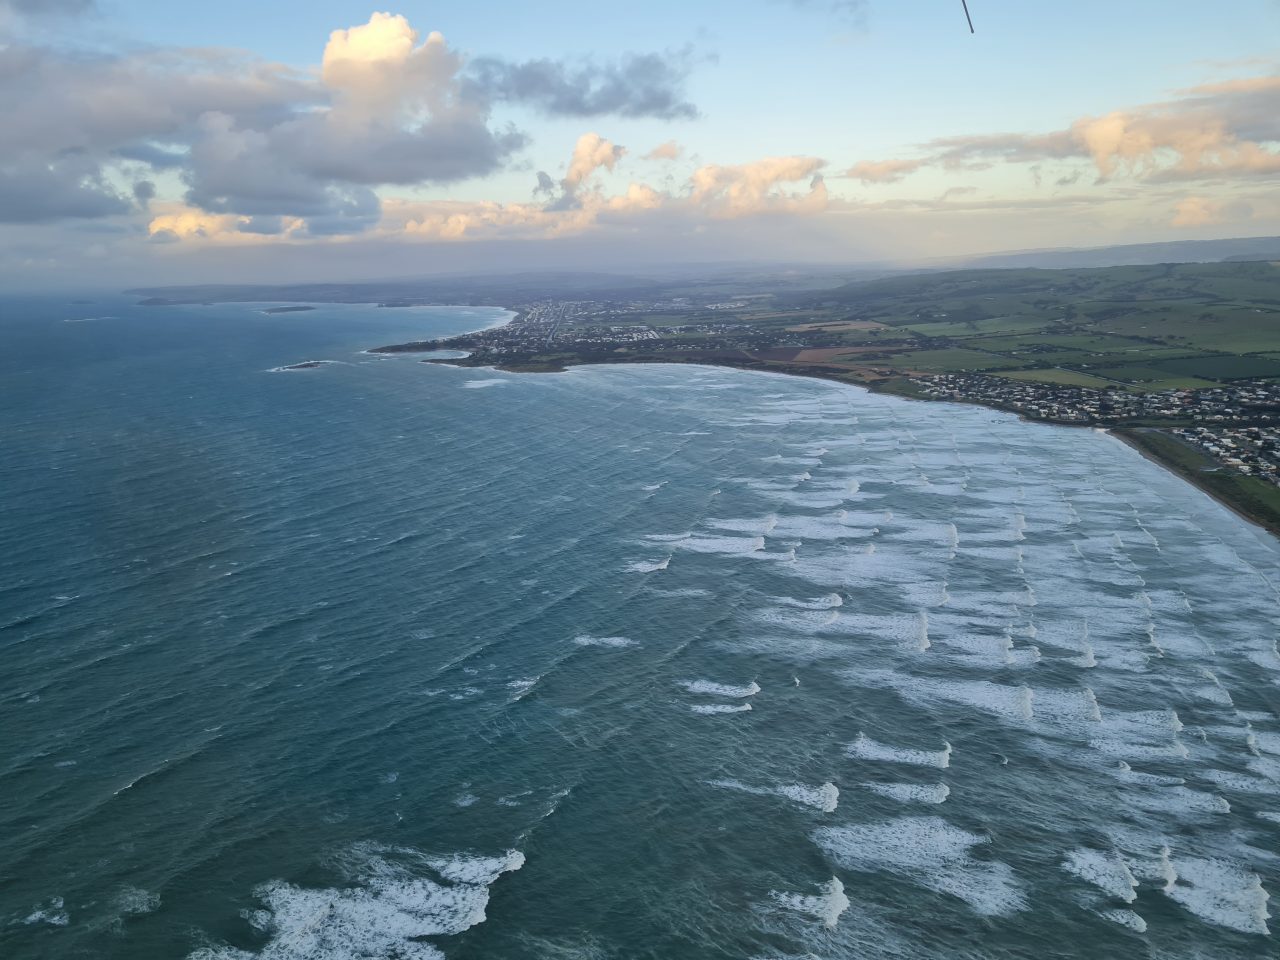 Aerial photo of coastline, ocean and land. Waves are breaking far out into the bay indicating a shallow coast. There are towns on the points on the coast. The sun is shining on the clouds  and there are patches of clear sky.